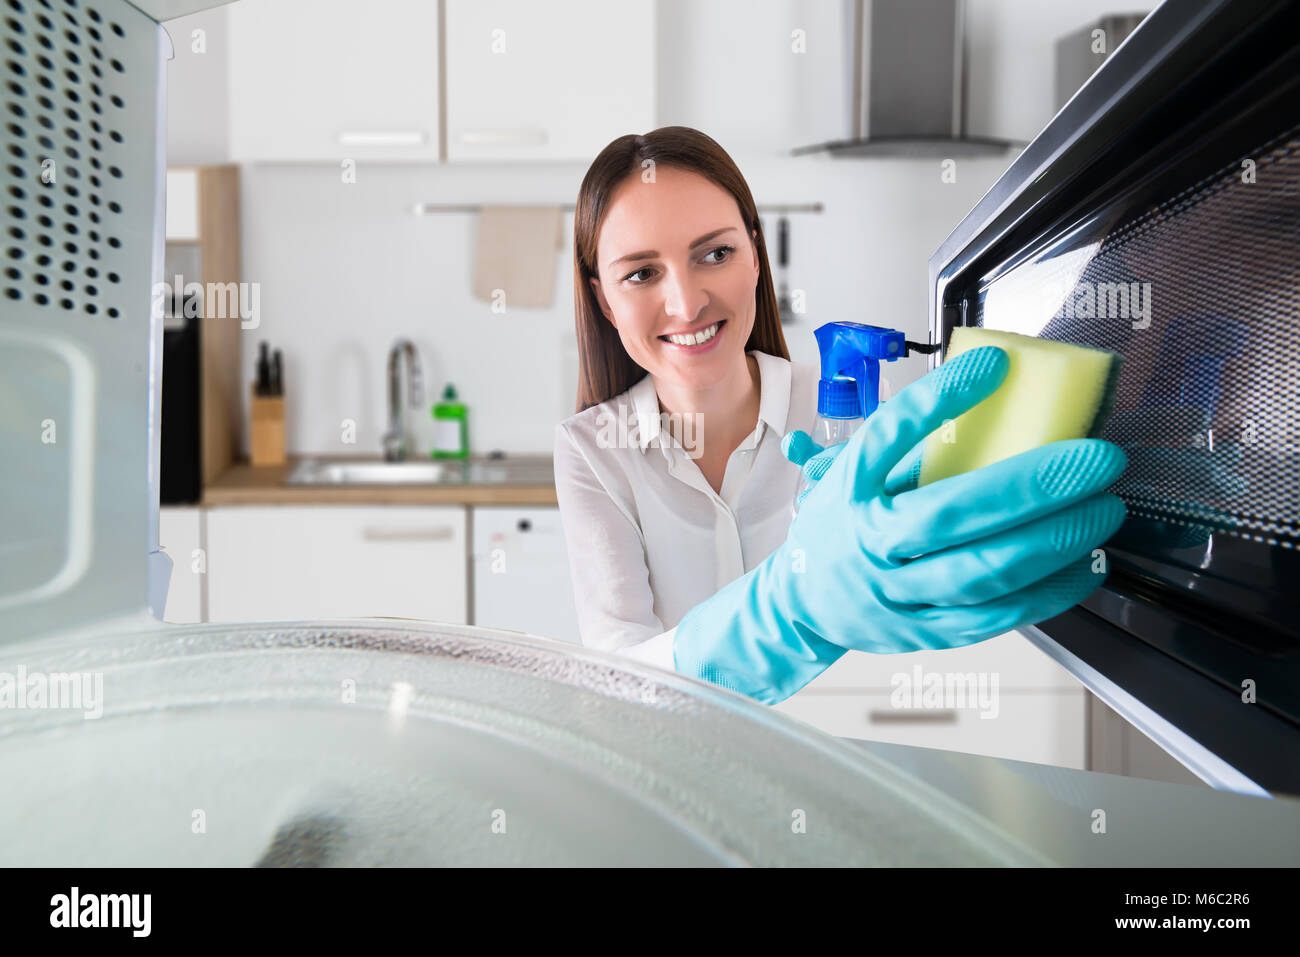 Young Woman Cleaning Microwave Oven With Spray Bottle And Sponge Stock Photo